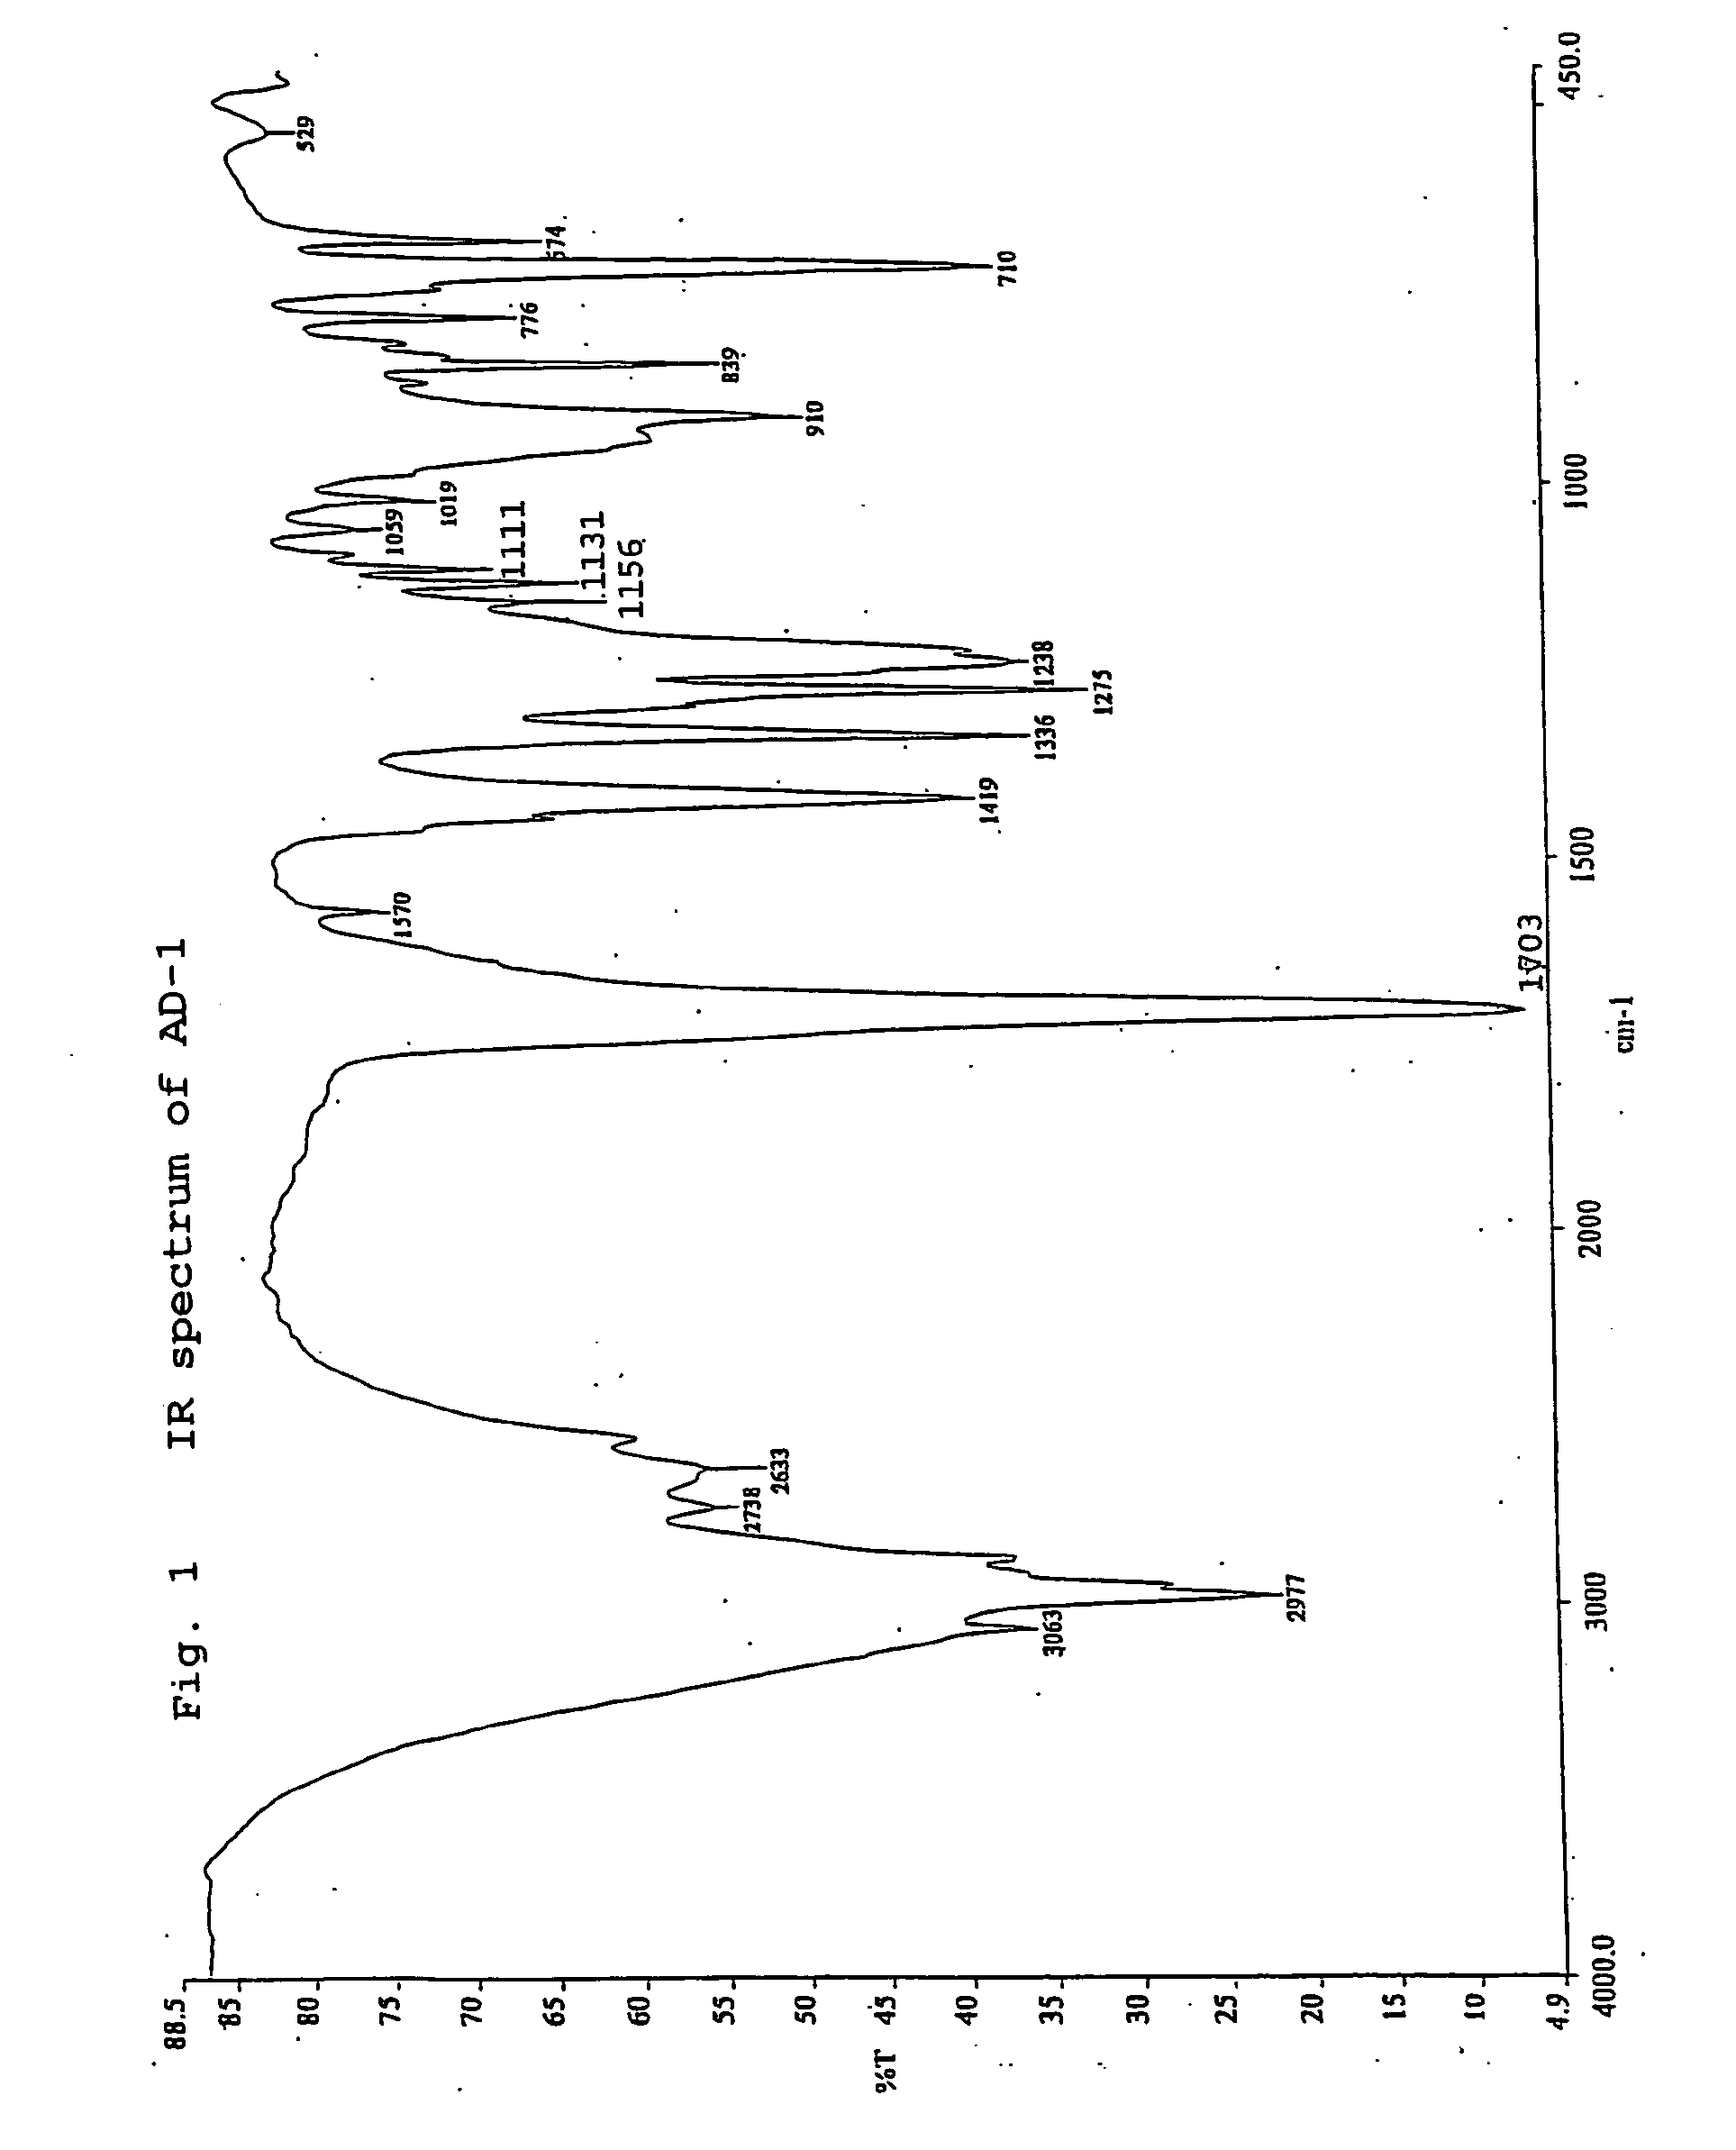 Cyclic carboxylic acid compound and use thereof